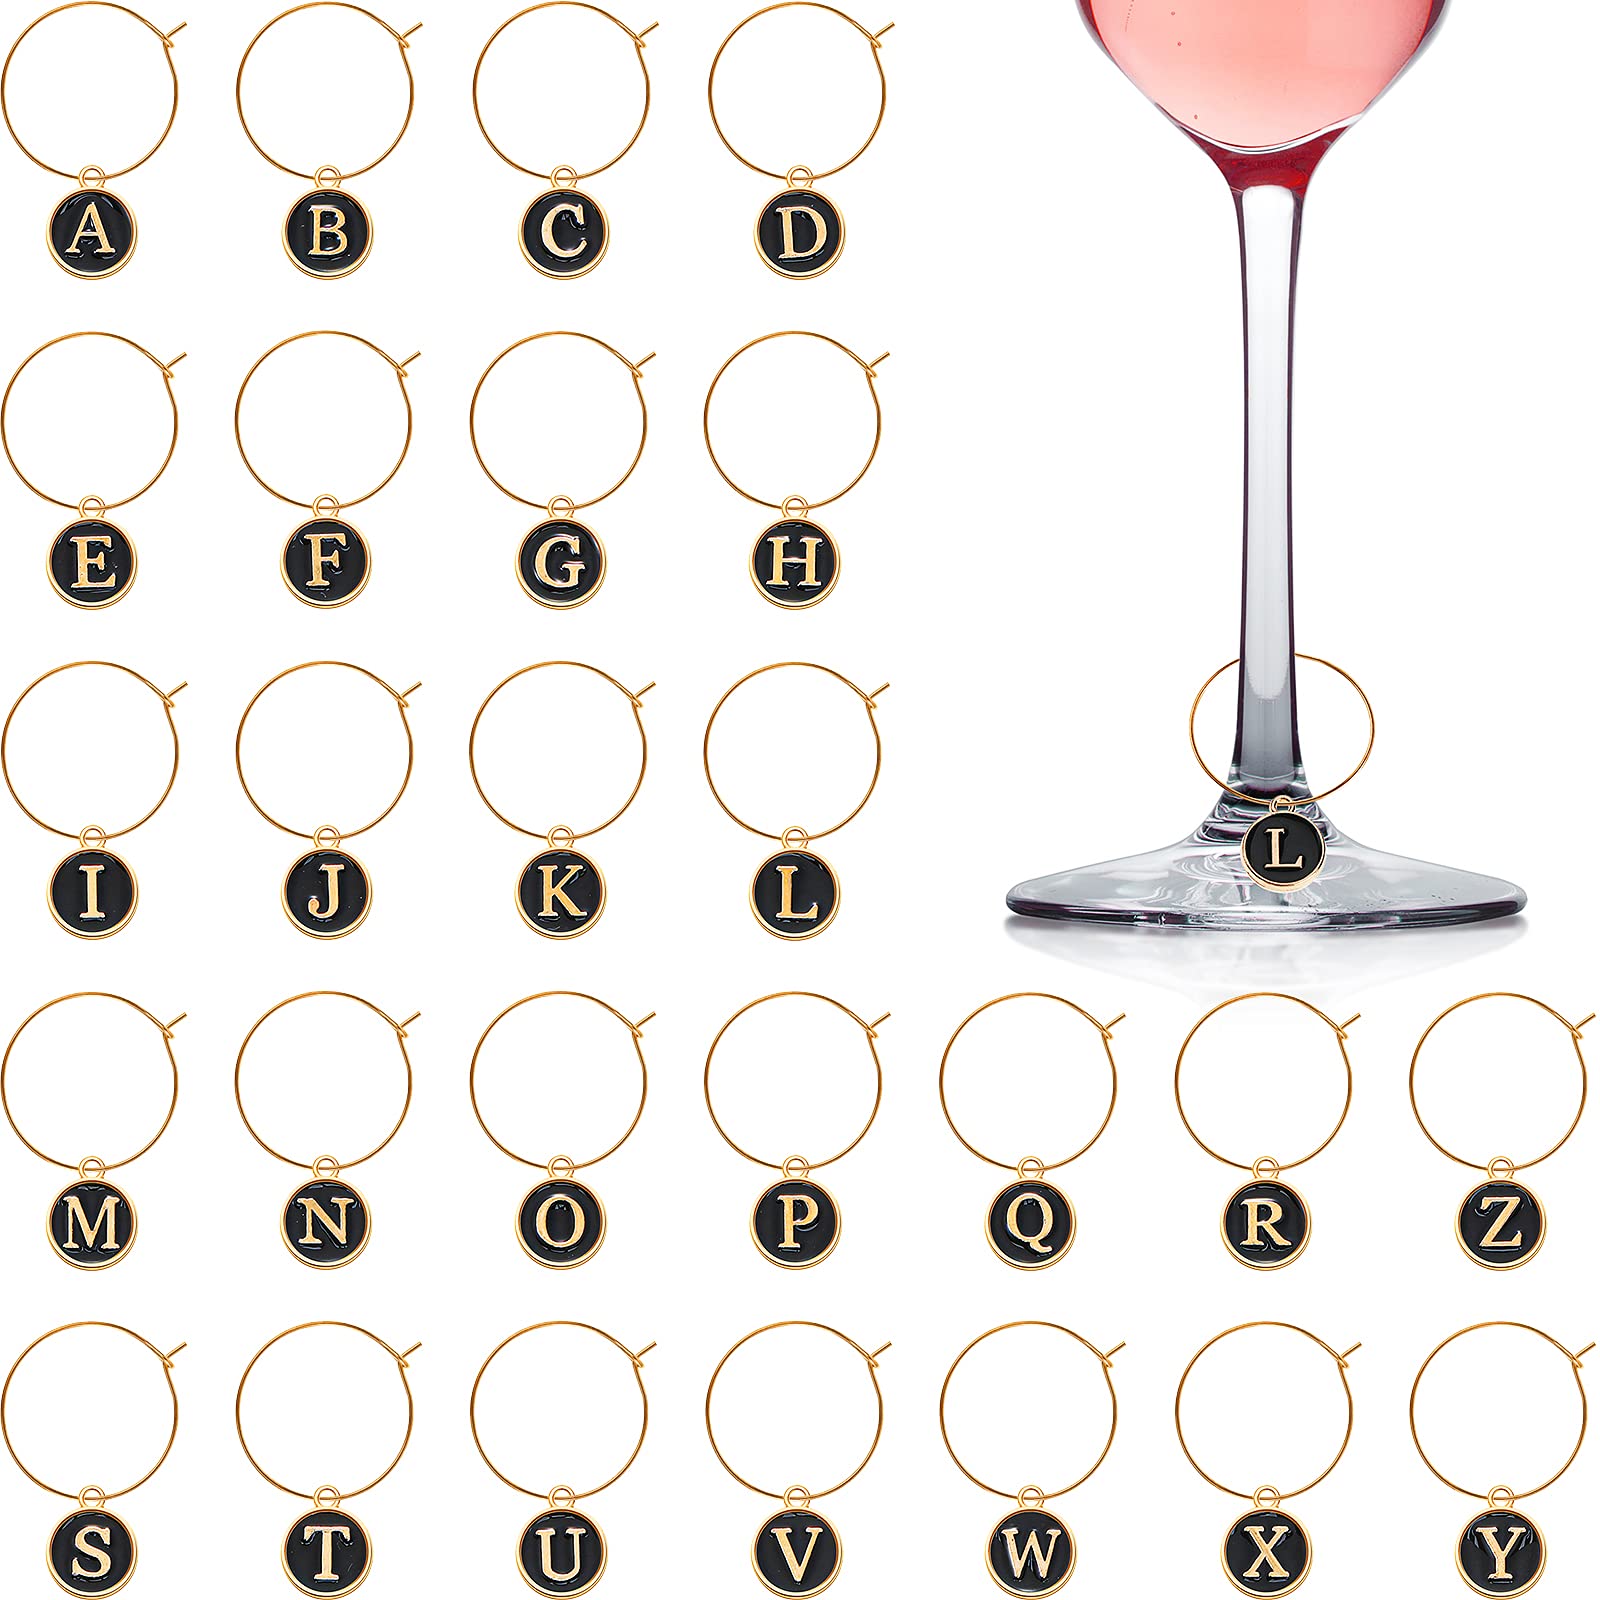 Hicarer 26 Pieces Wine Charms for Stem Glasses with Rings Tags Metal Letters Glass Charm Markers Letters Beads Markers for Wine Cocktail Champagne Party Favors Decorations Family Gathering (Black)